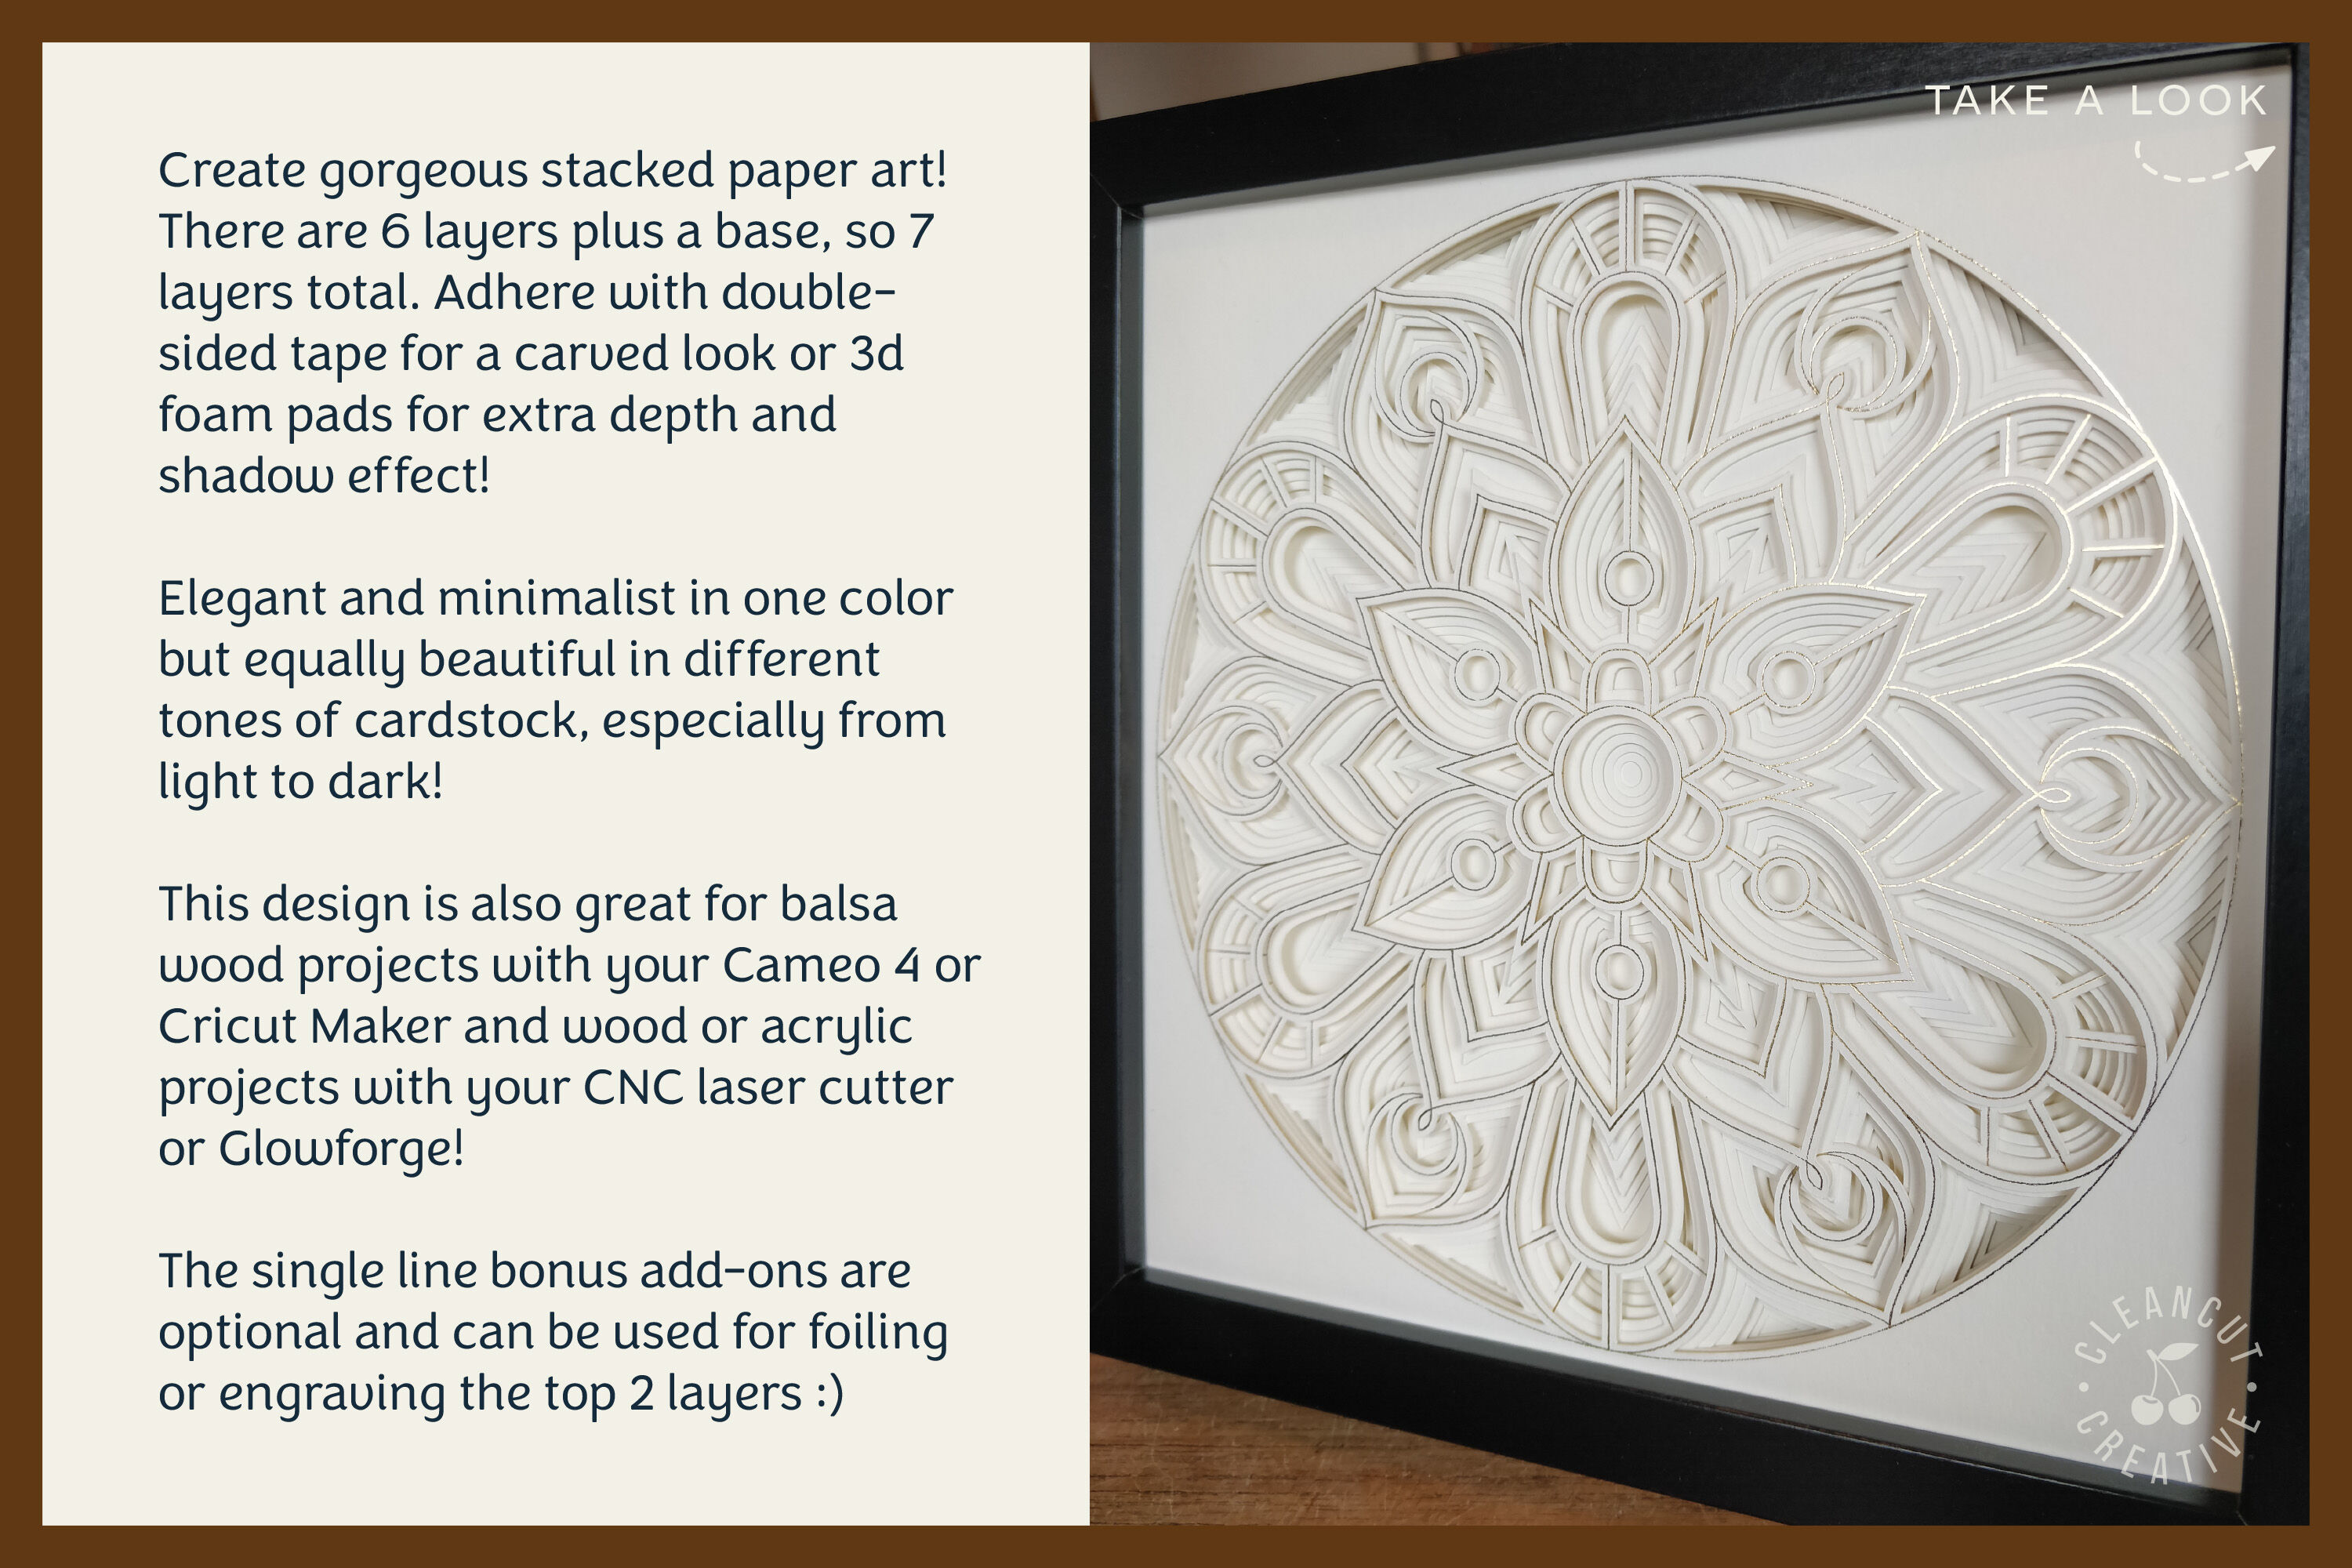 Download 3d Layered Mandala Svg Stacked Paper Shadow Box Laser Cut Wood Art By Cleancutcreative Thehungryjpeg Com SVG, PNG, EPS, DXF File